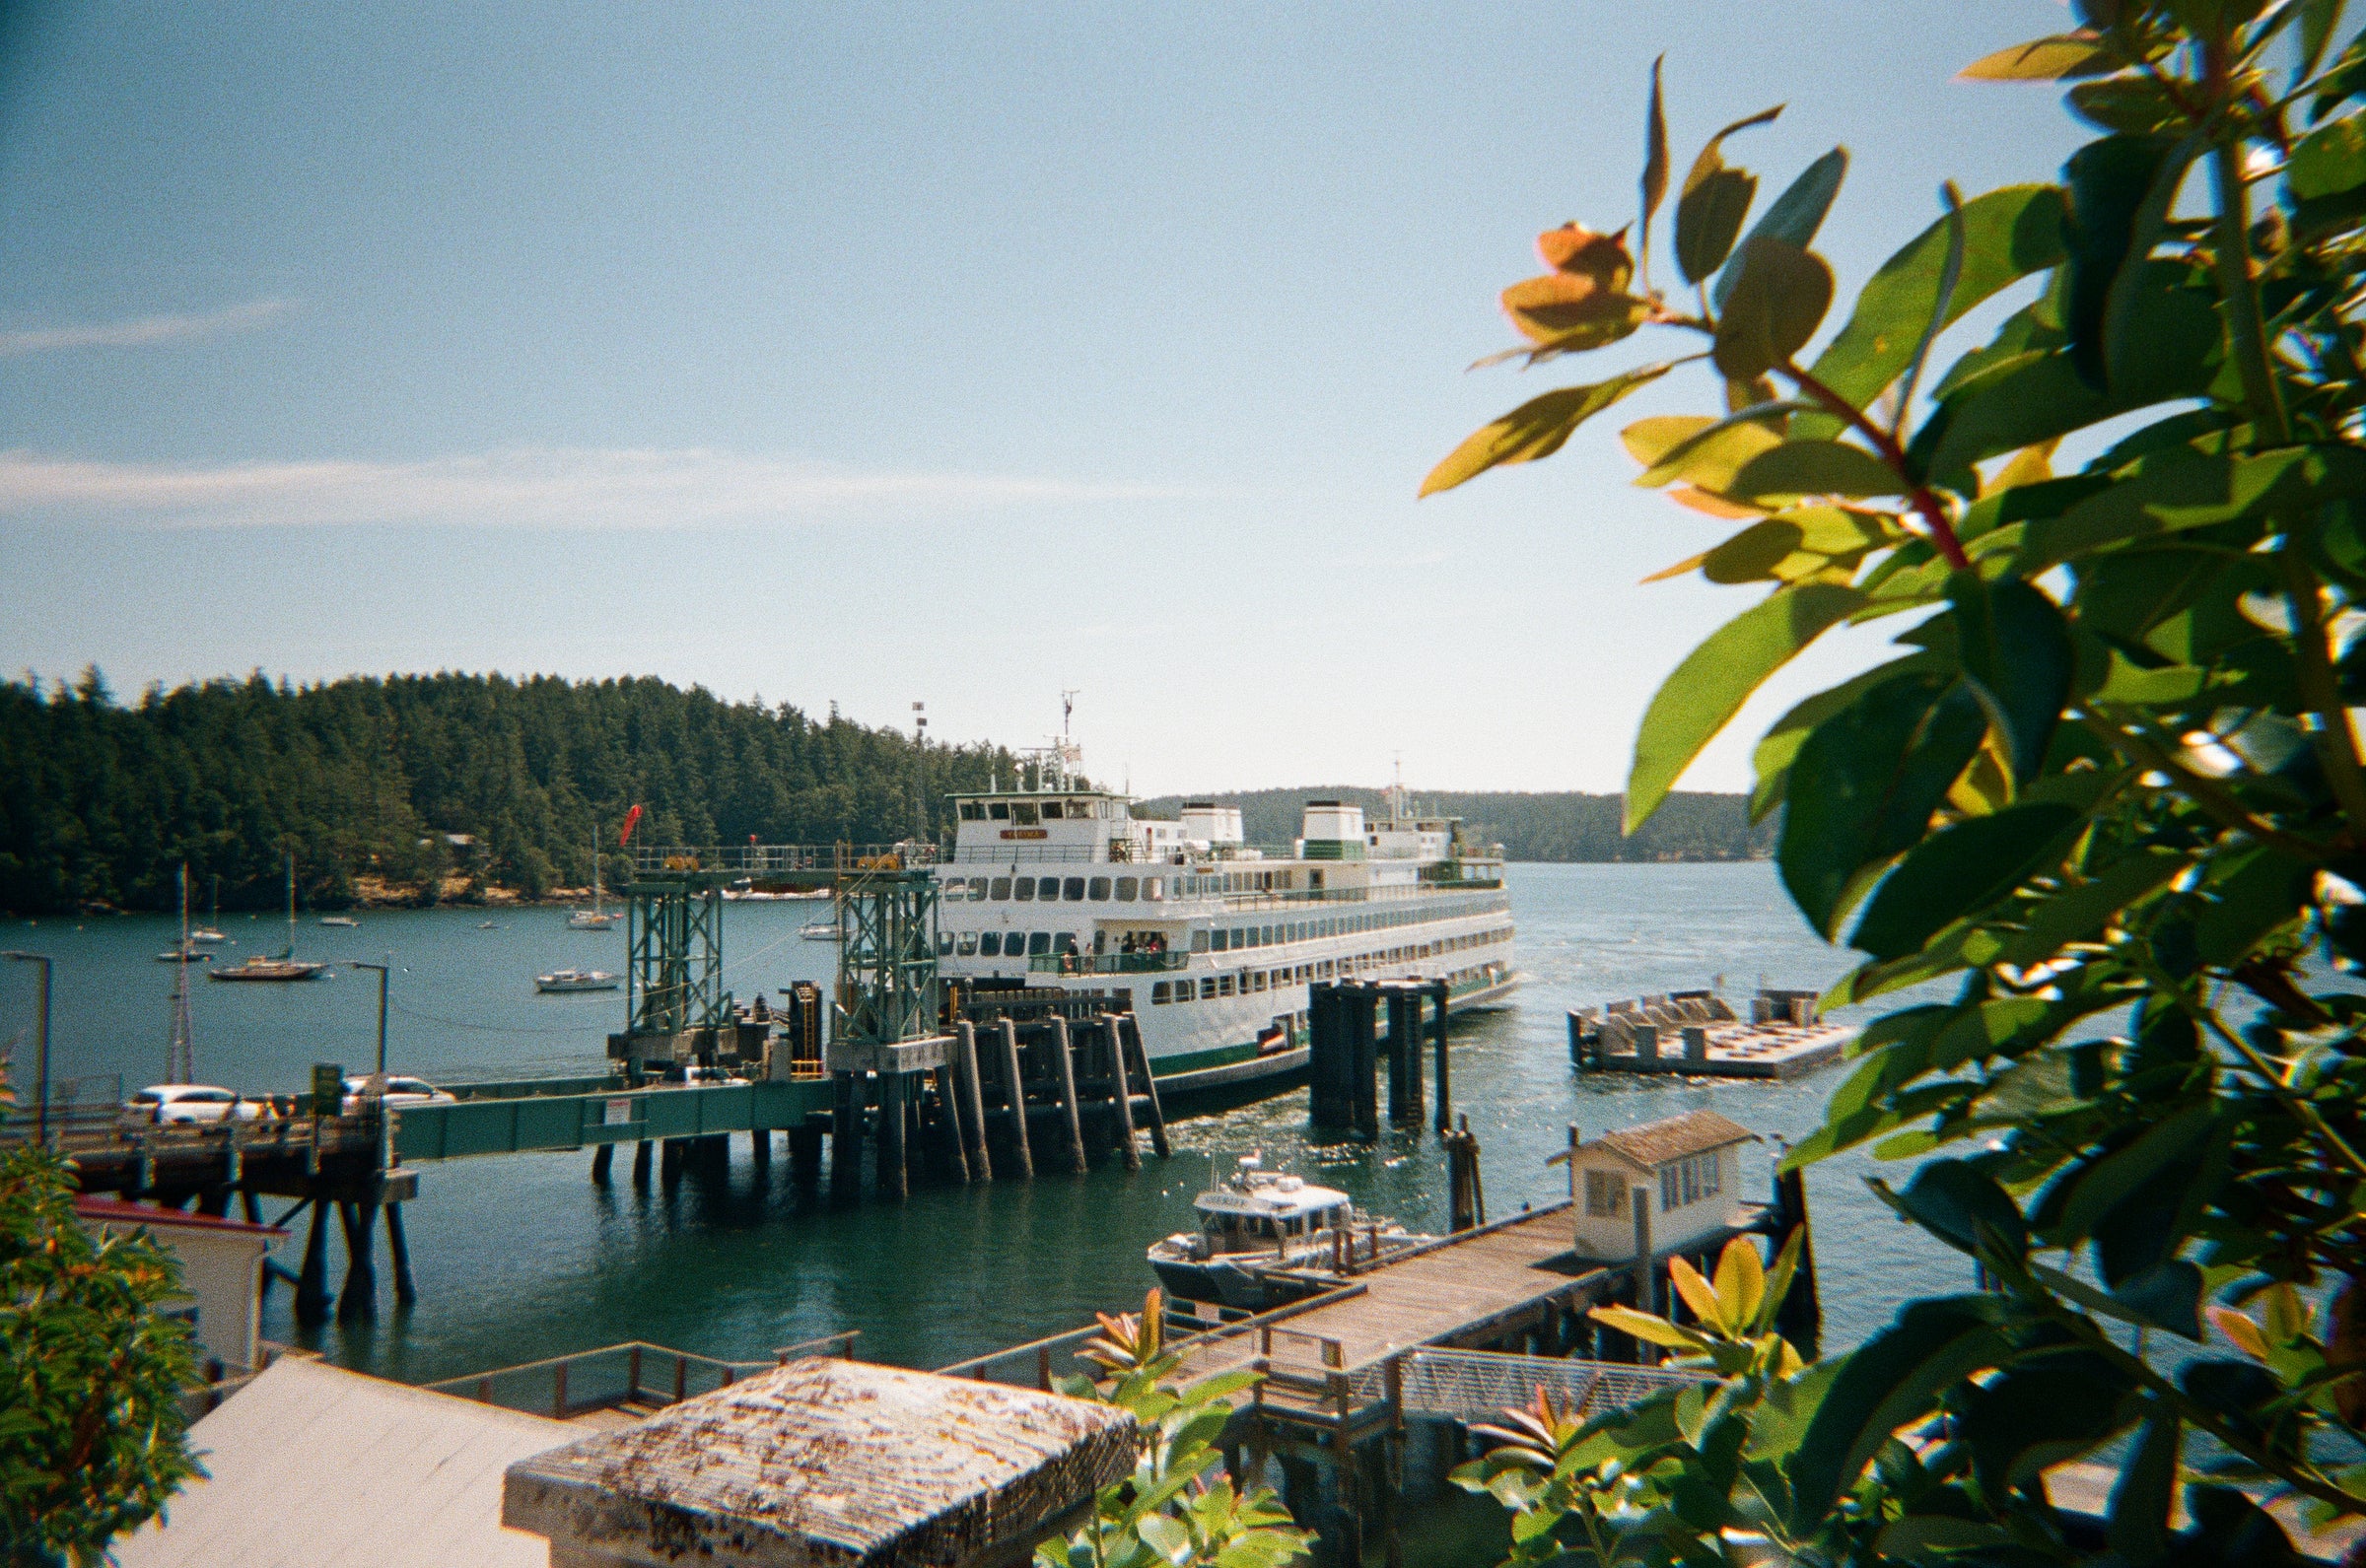 Washington state ferry waiting at Orcas Island ferry landing on a summer day